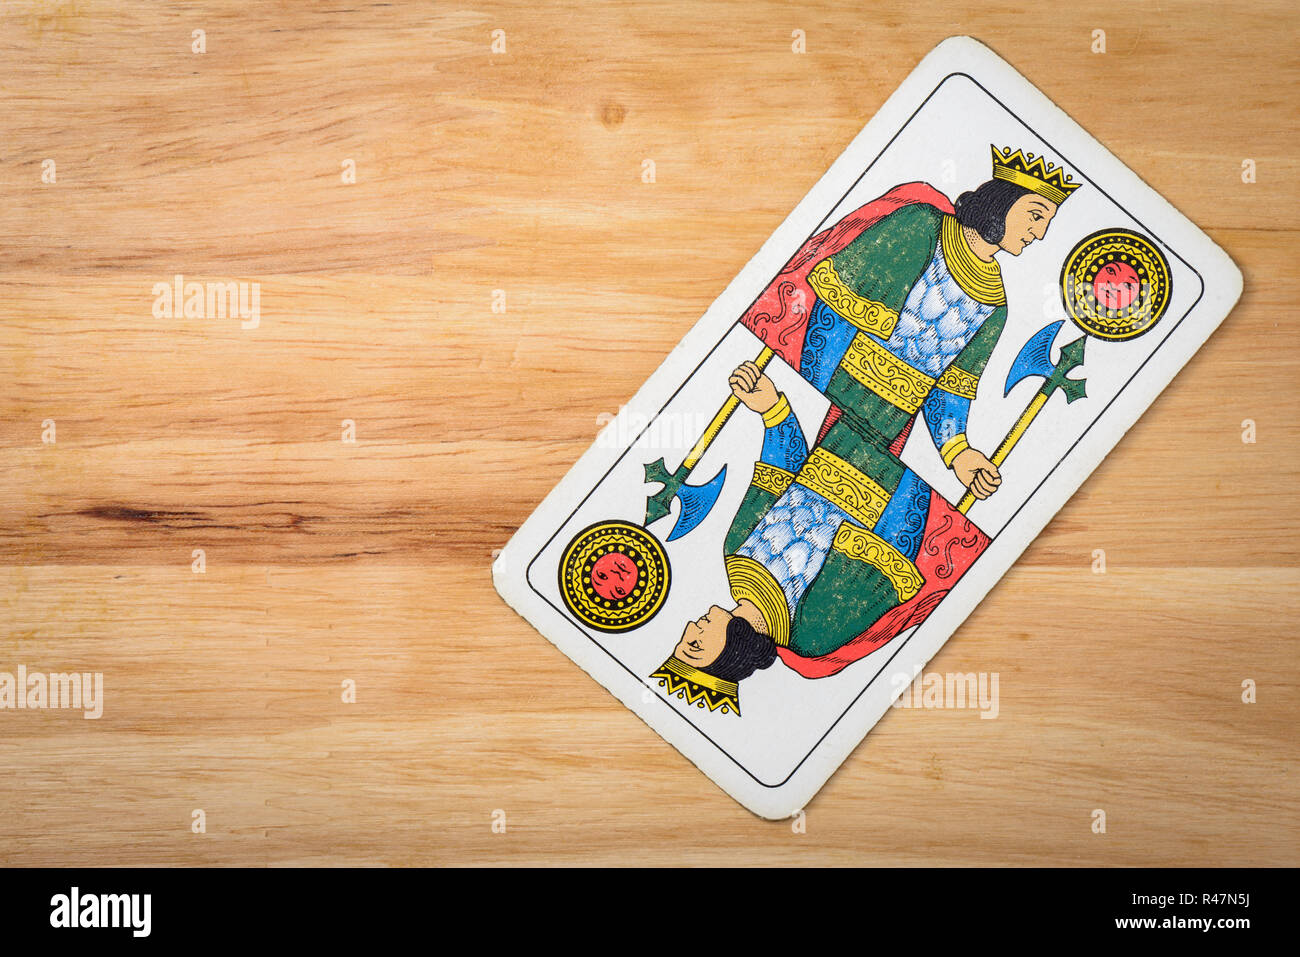 Scopa Card Game High Resolution Stock Photography and Images - Alamy